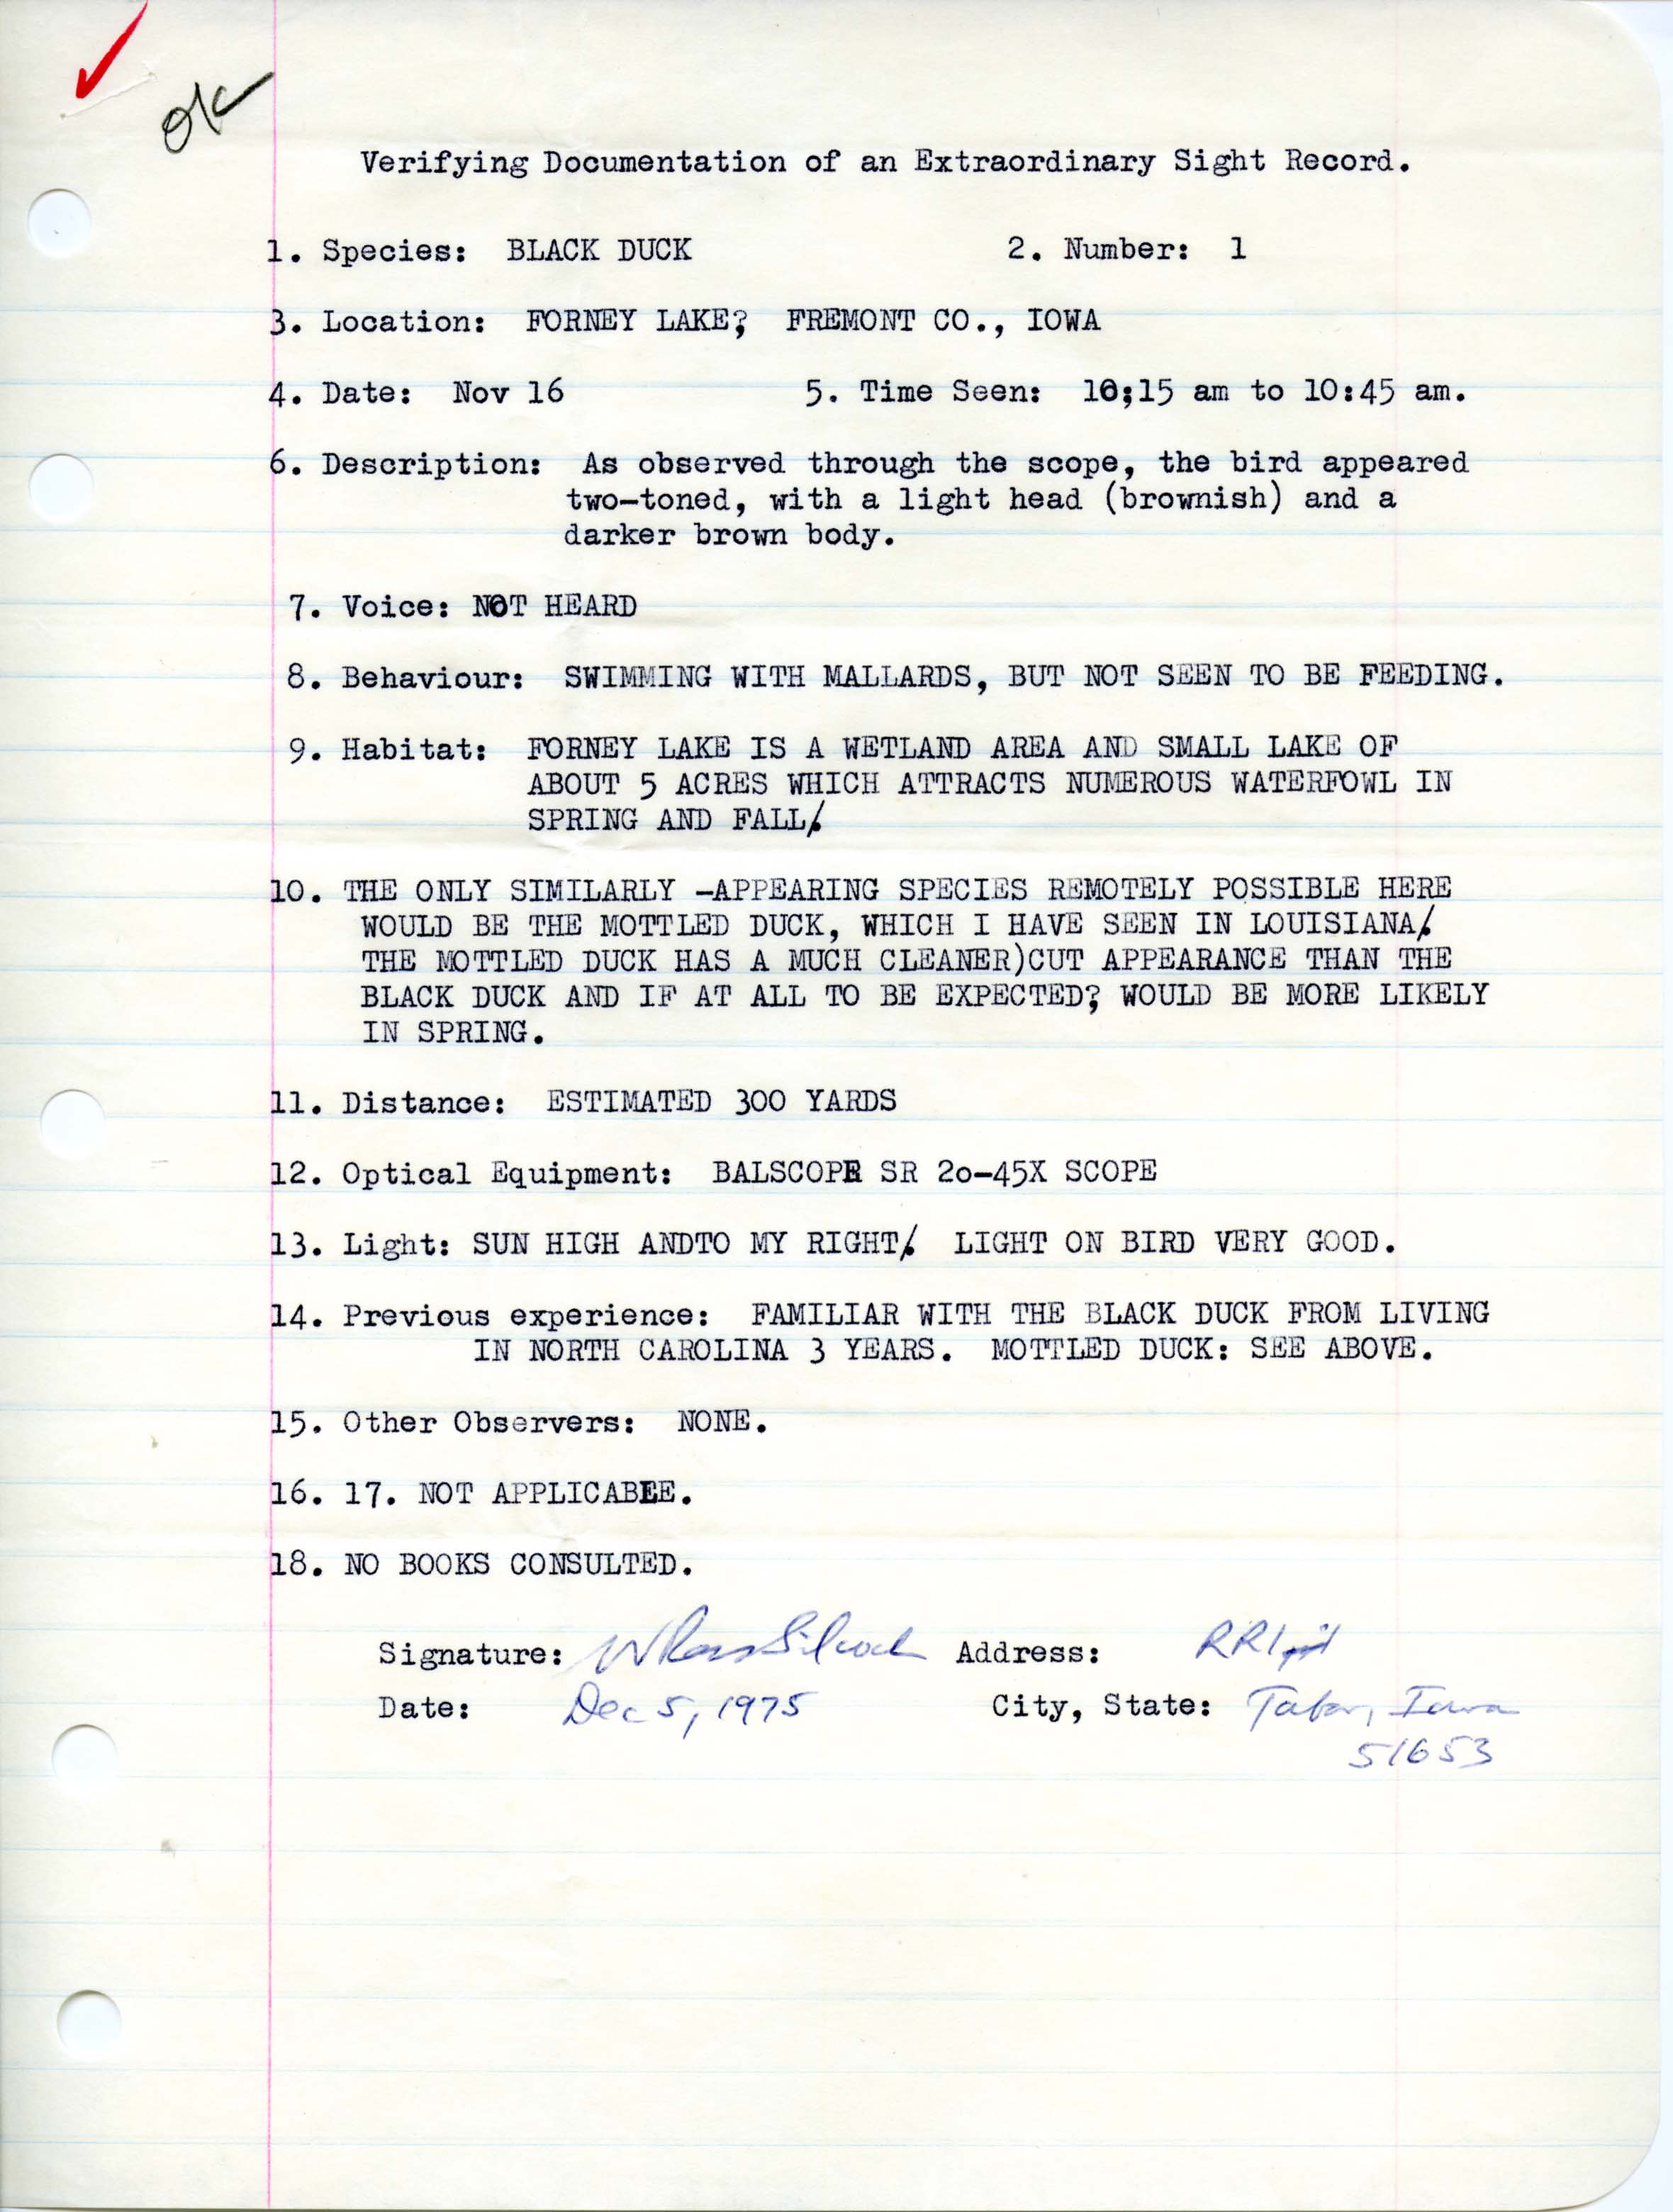 Rare bird documentation form for Black Duck at Forneys Lake, 1975